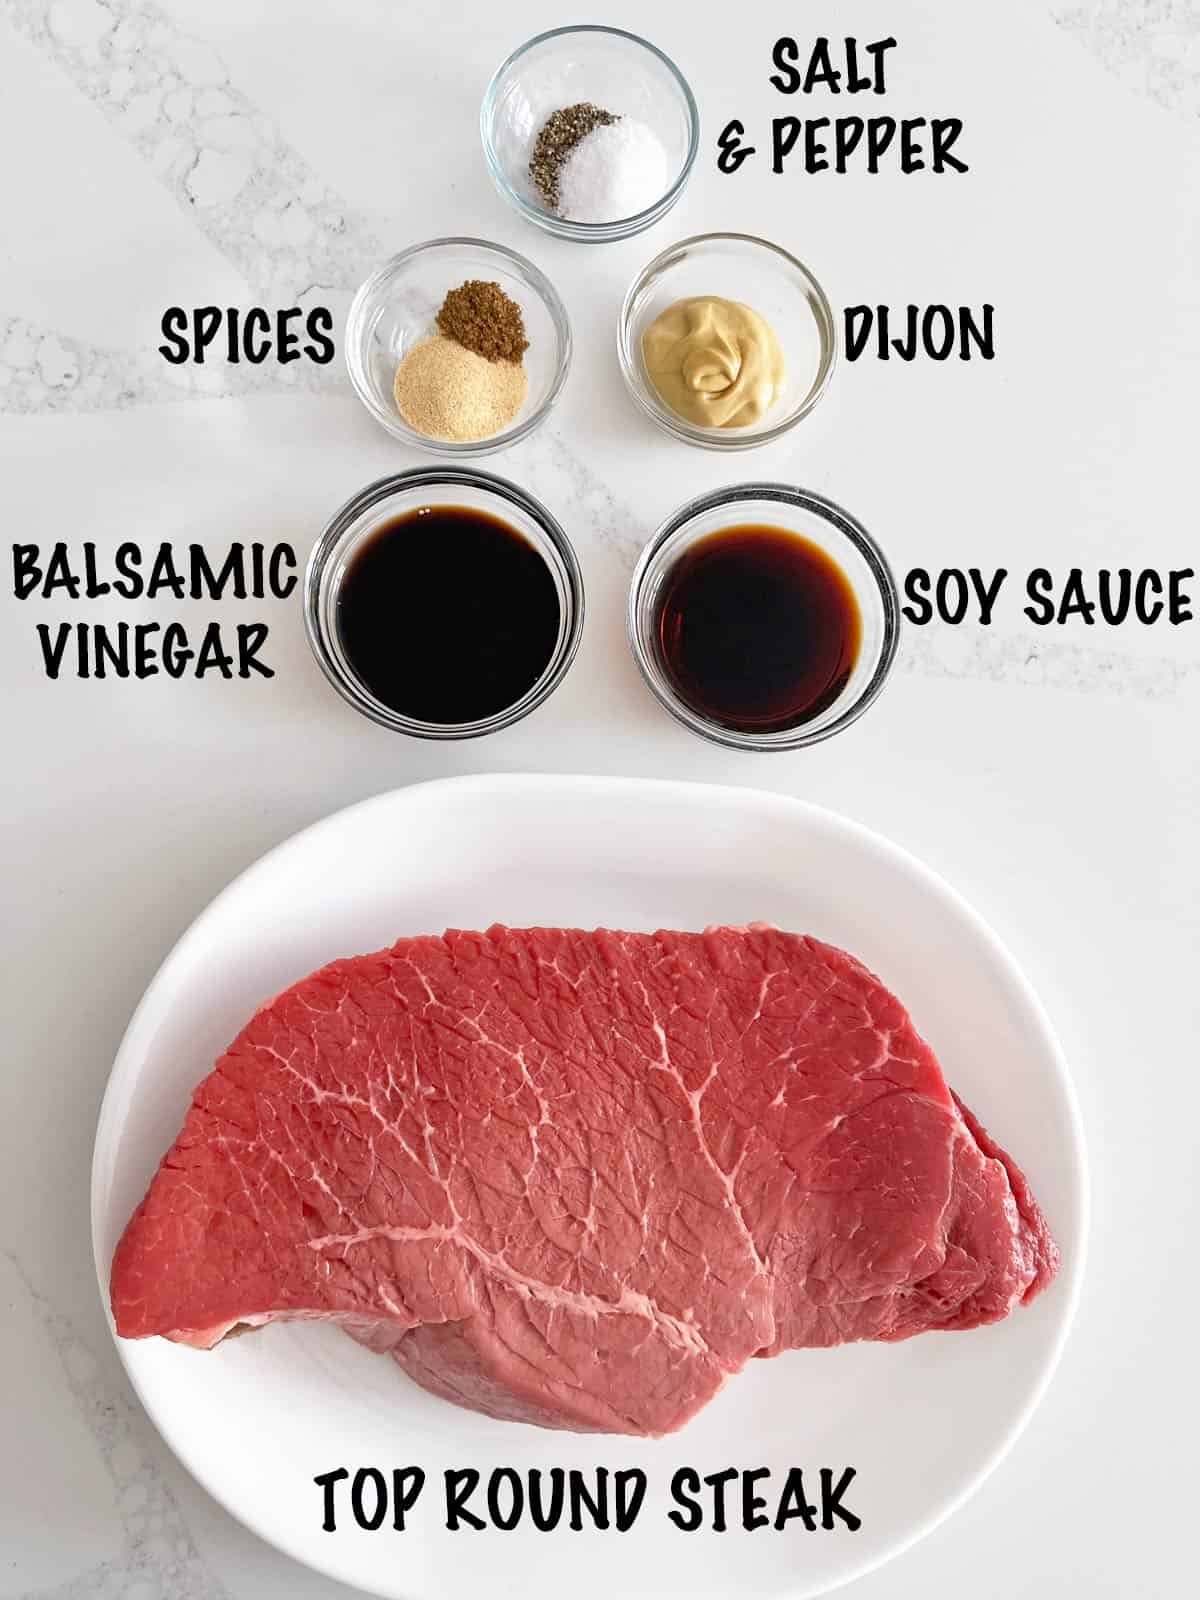 The ingredients needed to cook a London broil steak.